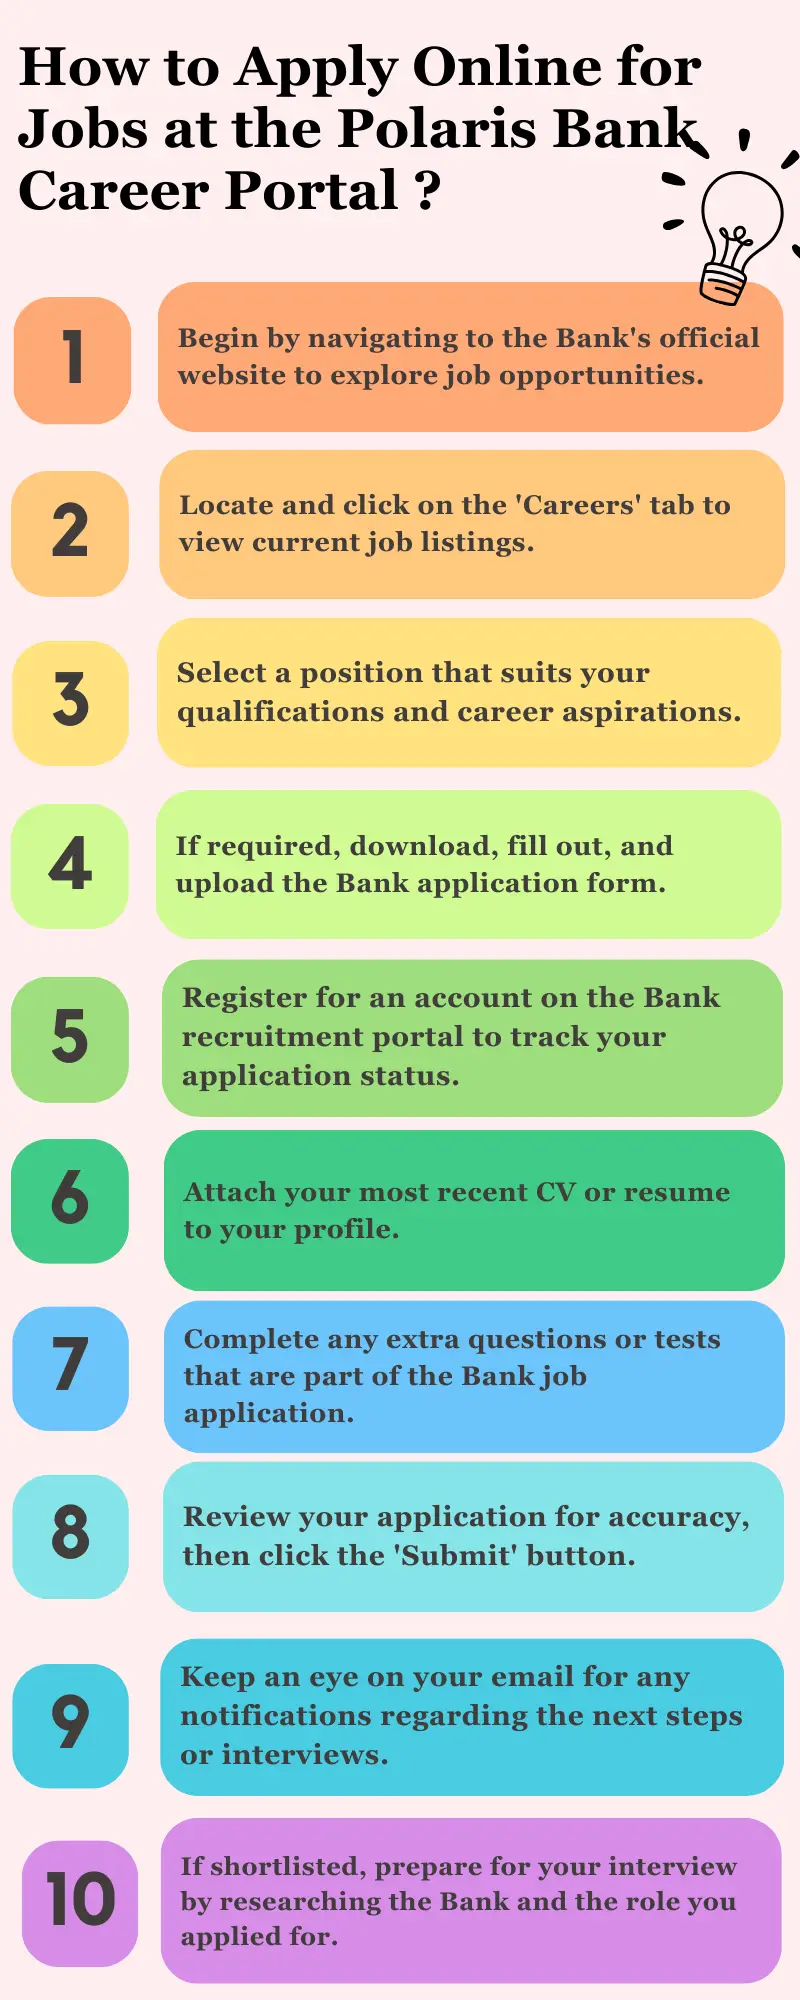 How to Apply Online for Jobs at the Polaris Bank Career Portal ?